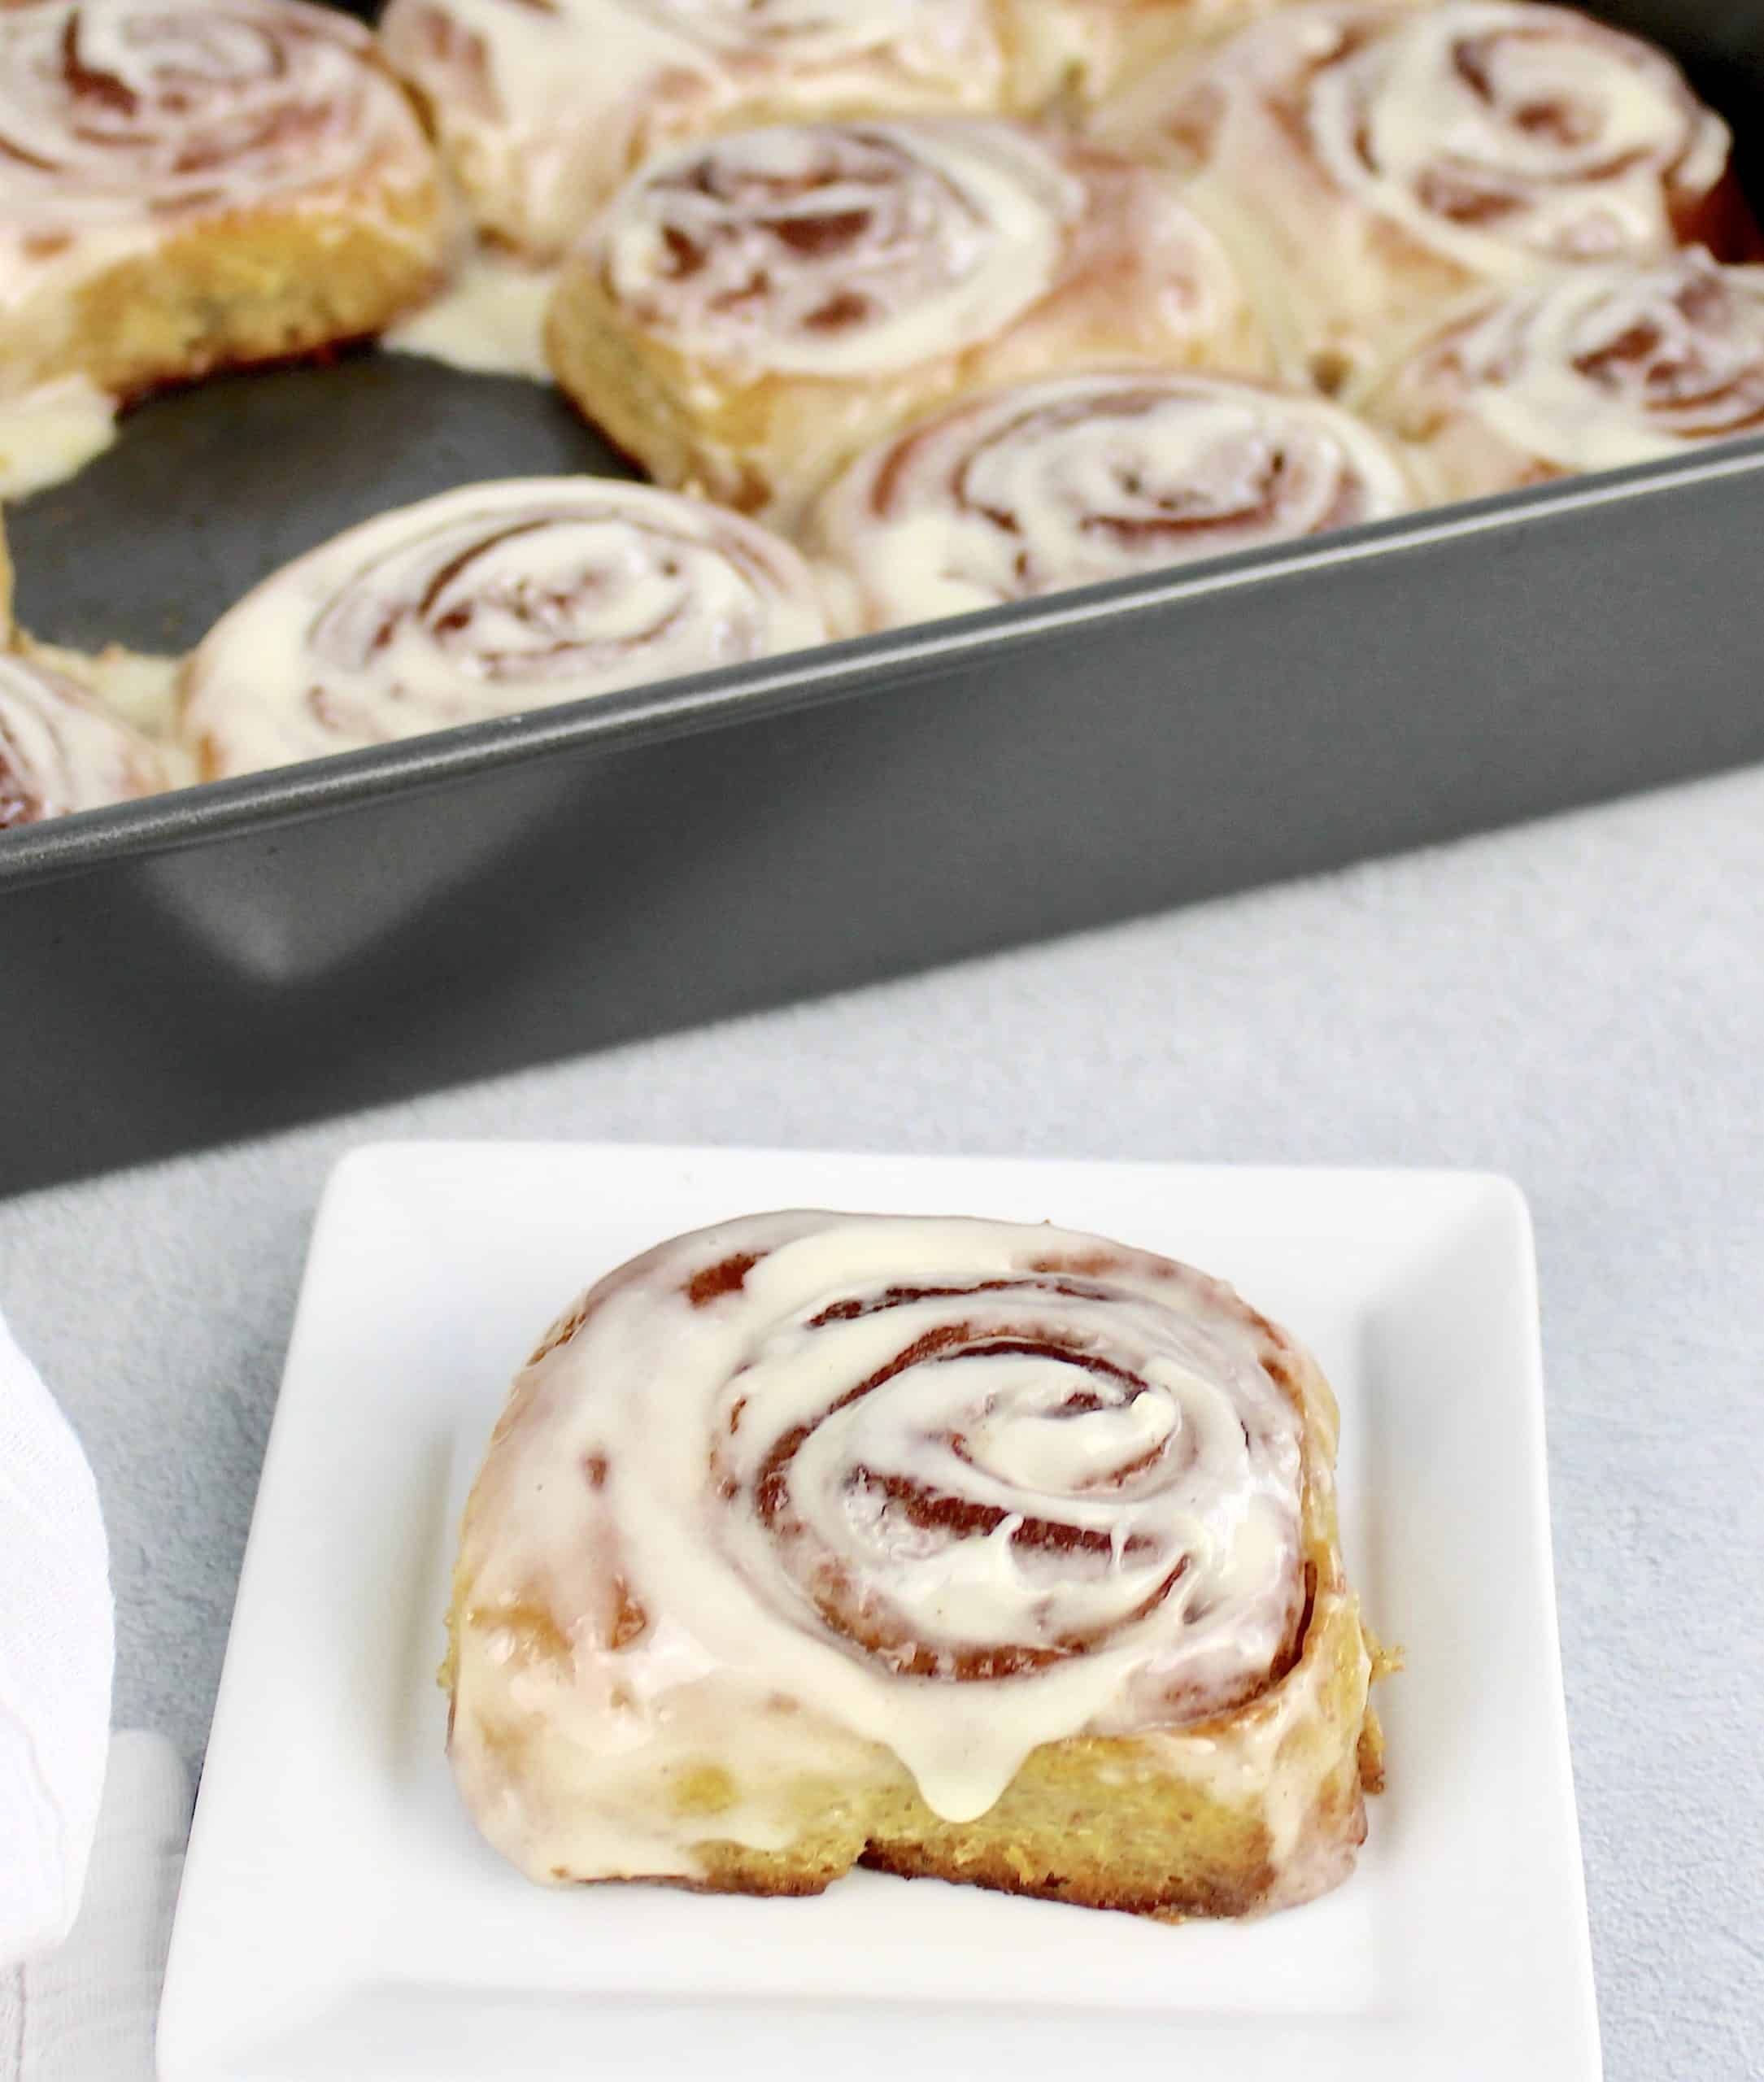 cinnamon roll with icing on white plate with baking pan in background